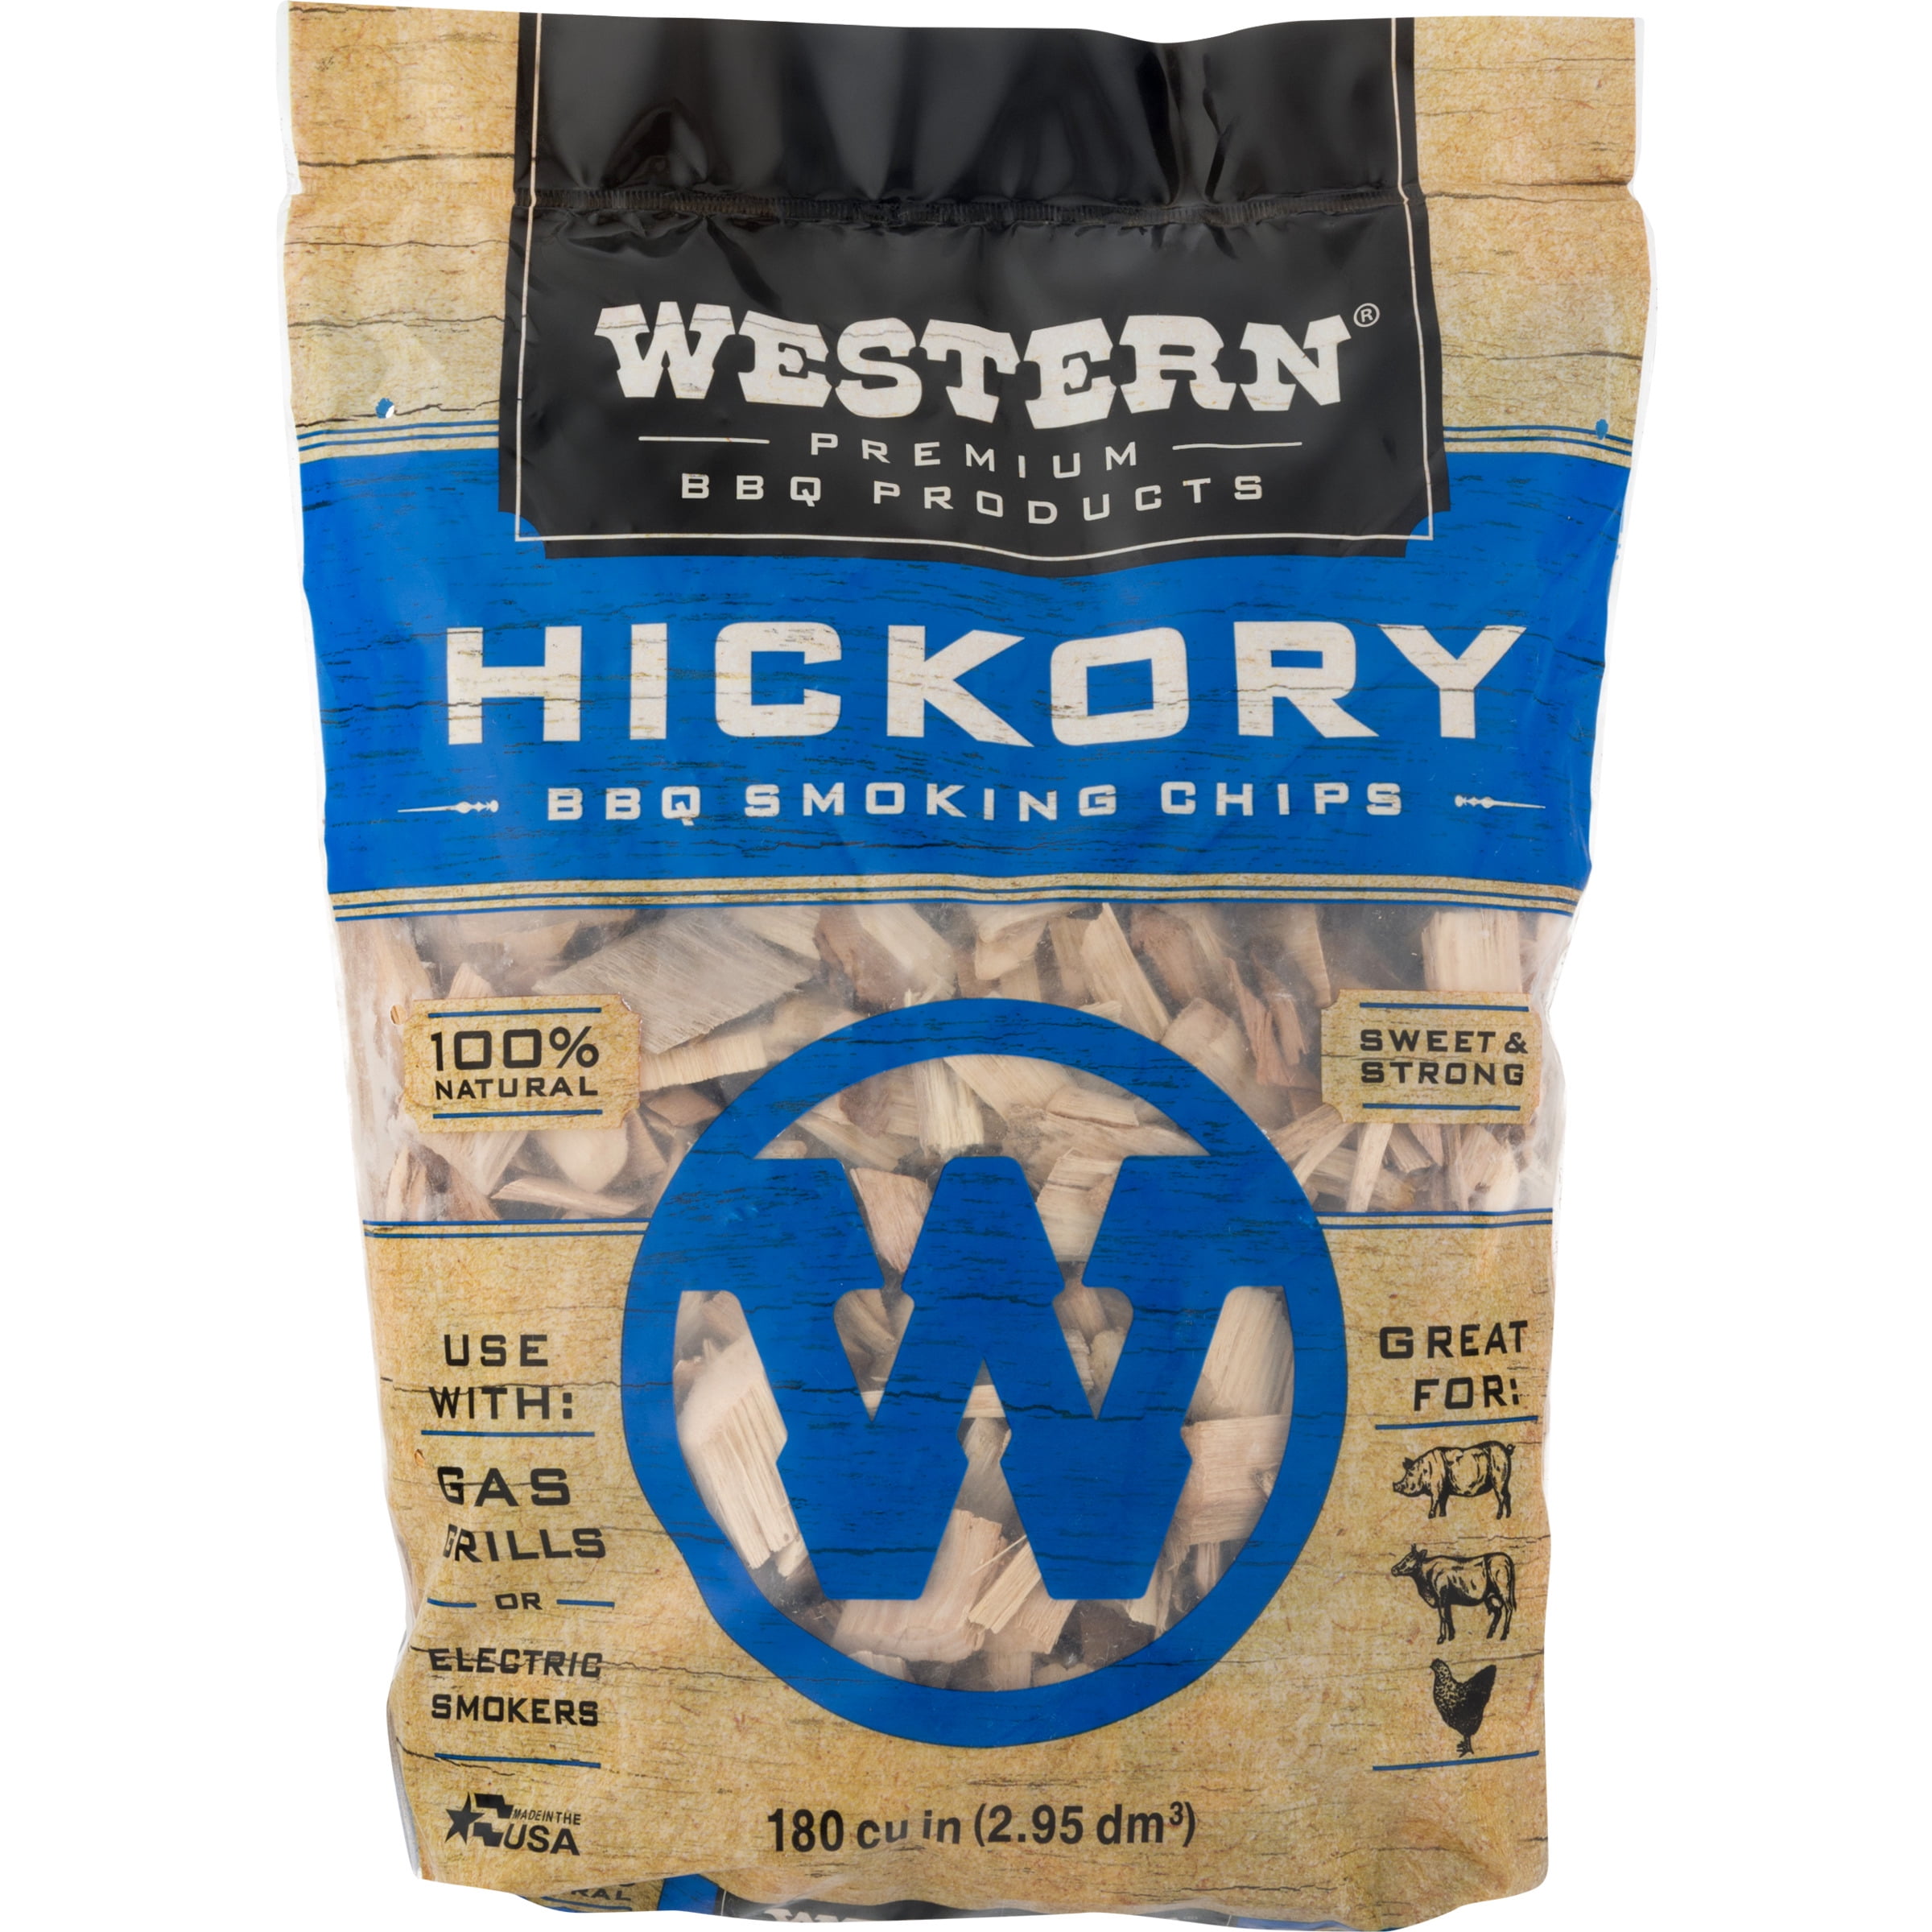 Western Premium BBQ Products Hickory BBQ Smoking Chips, 180 Cu in